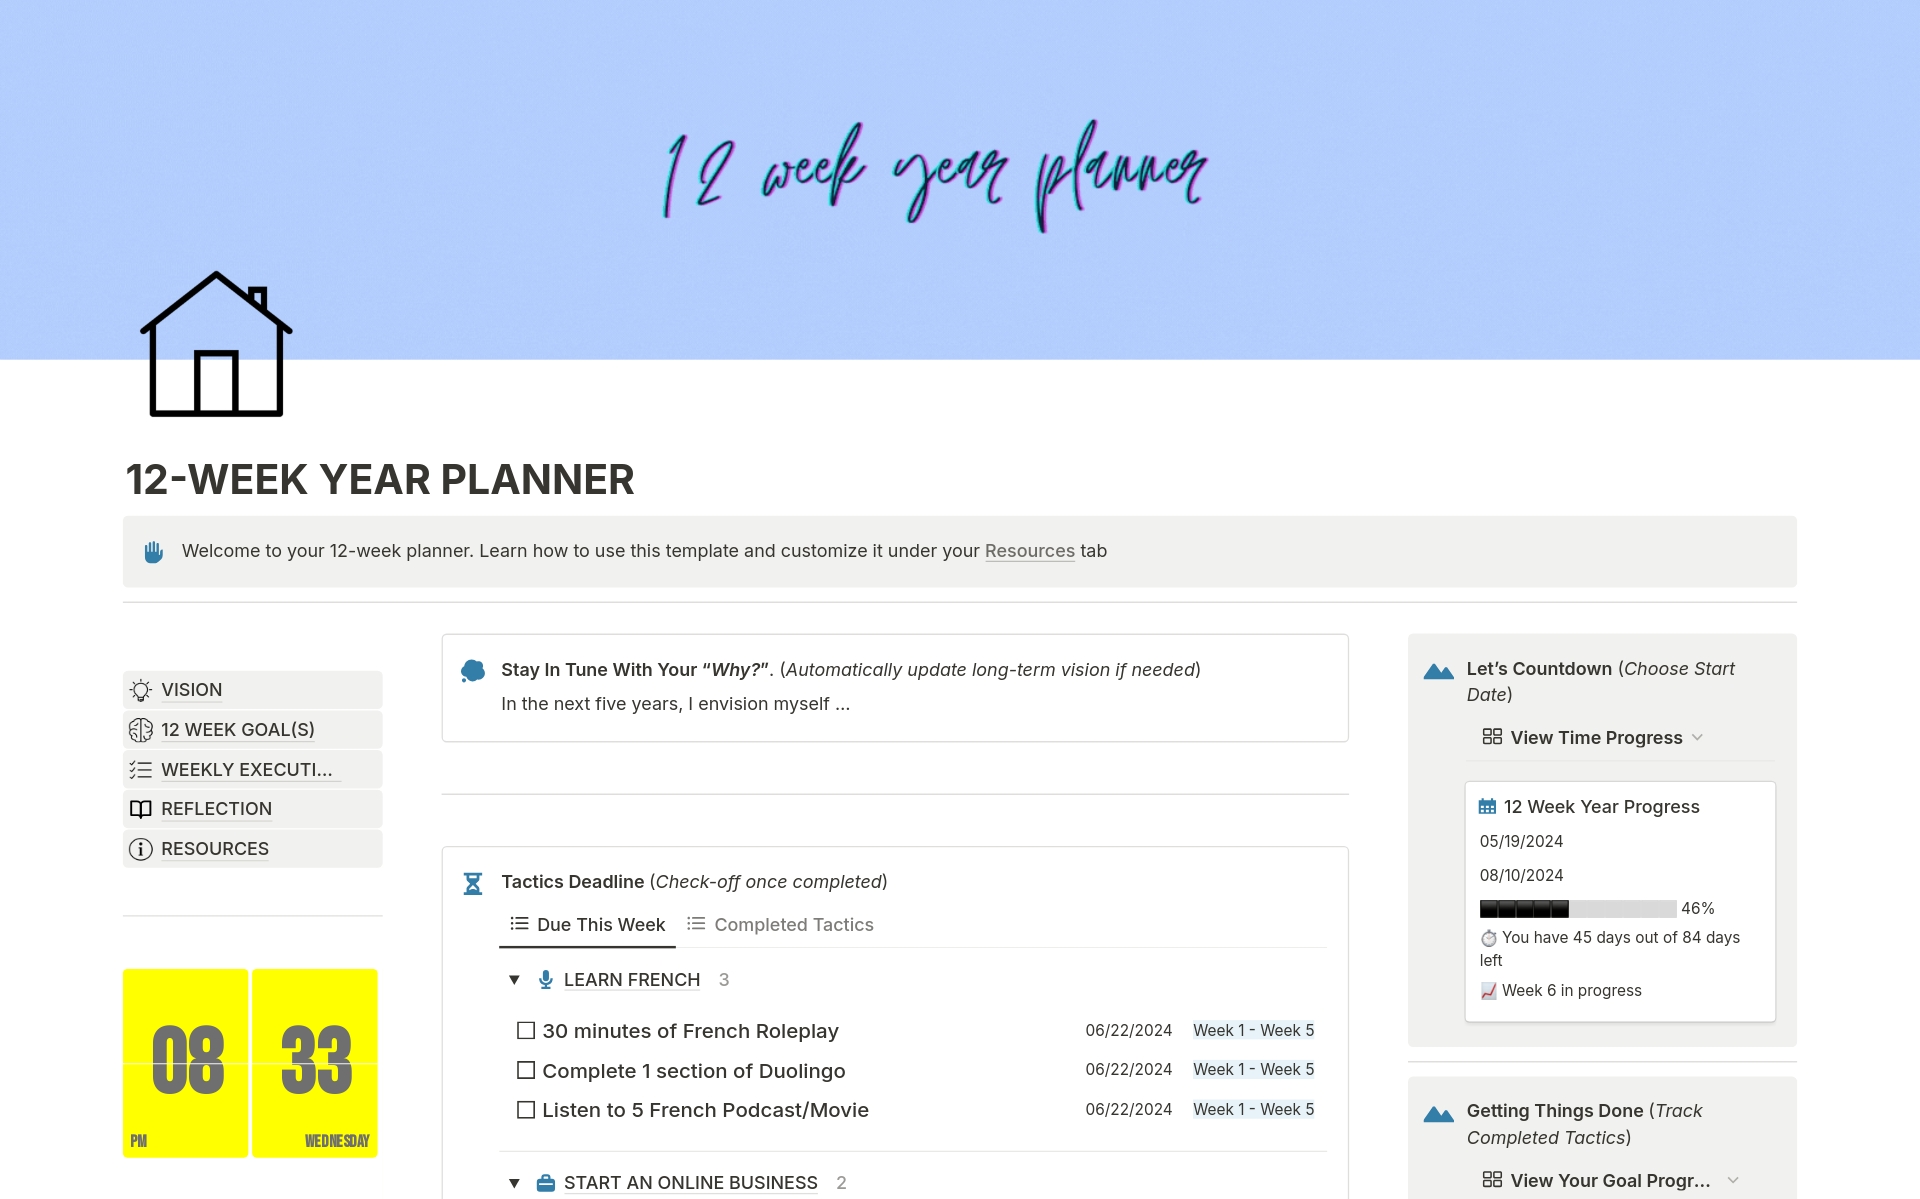 Our 12-Week Year Planner, inspired by the best-selling book by Brian P. Moran and Michael Lennington, streamlines your goal-setting journey. Stay connected with your progress, identify execution gaps, and achieve more in less time!